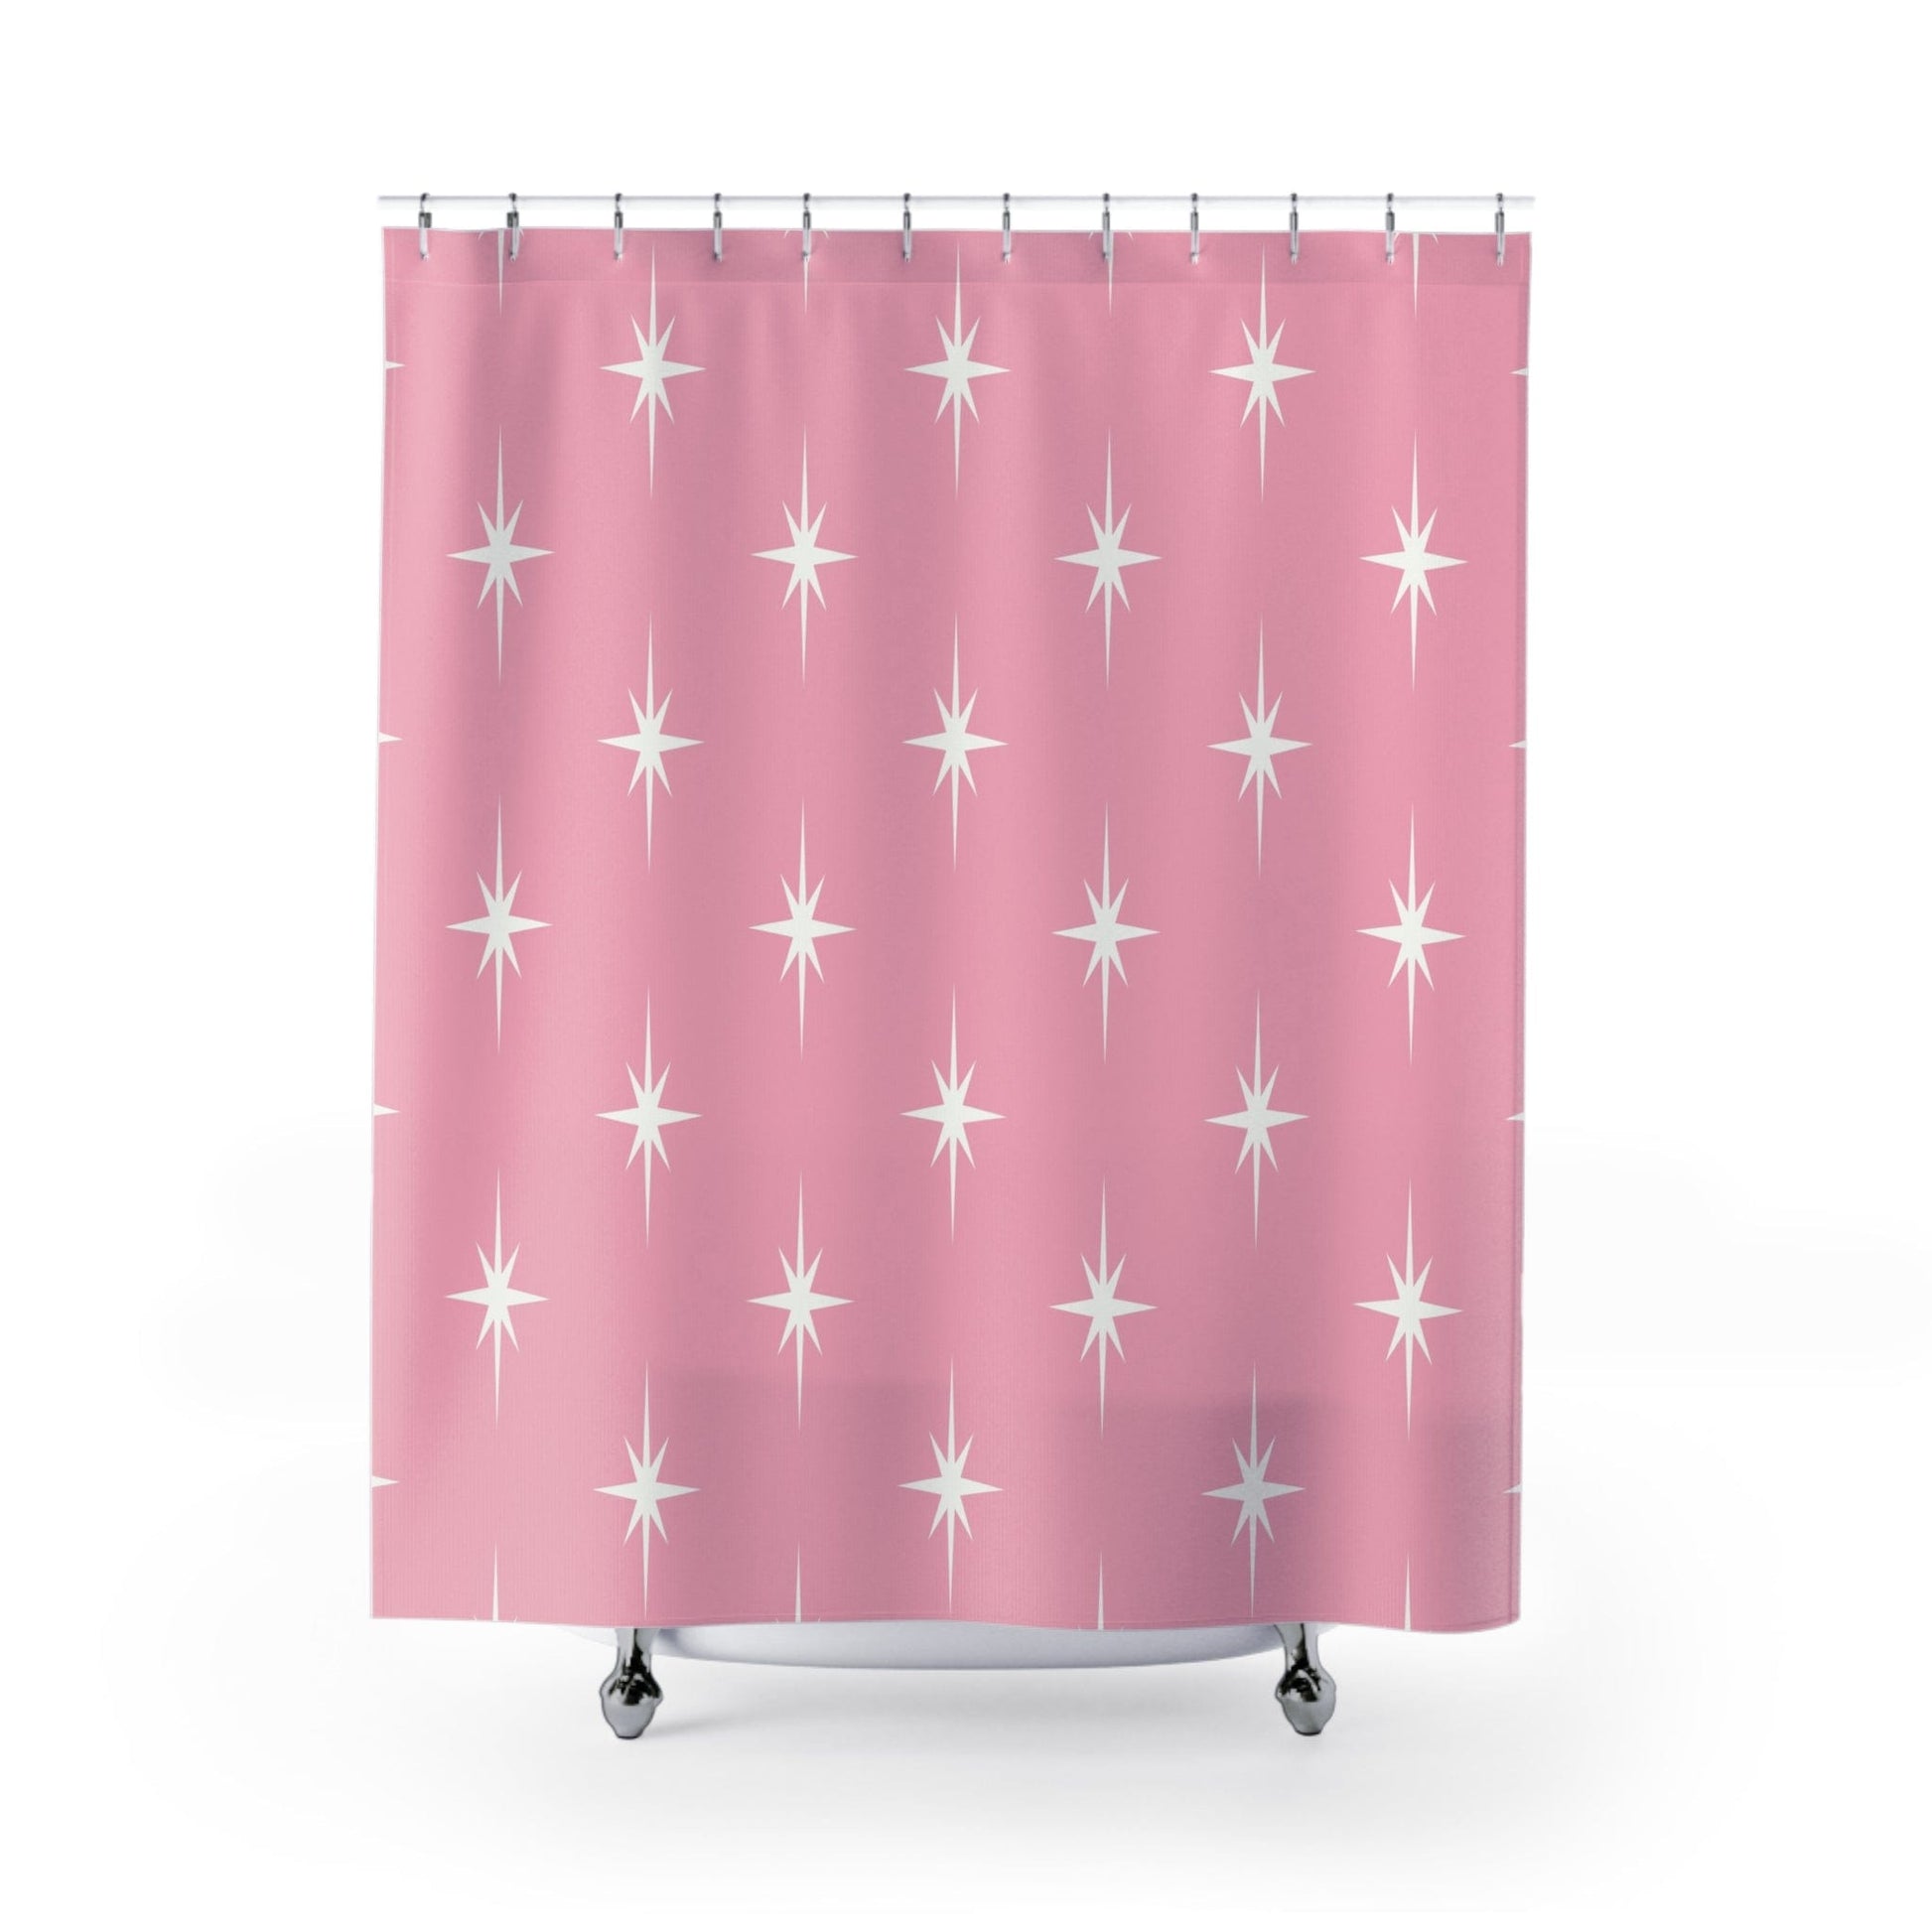 Kate McEnroe New York 50s Retro Mid Century Modern Atomic Starburst Shower Curtains in Vintage Pink and White Shower Curtains 70" × 90" S40-STB-PNK-7X9